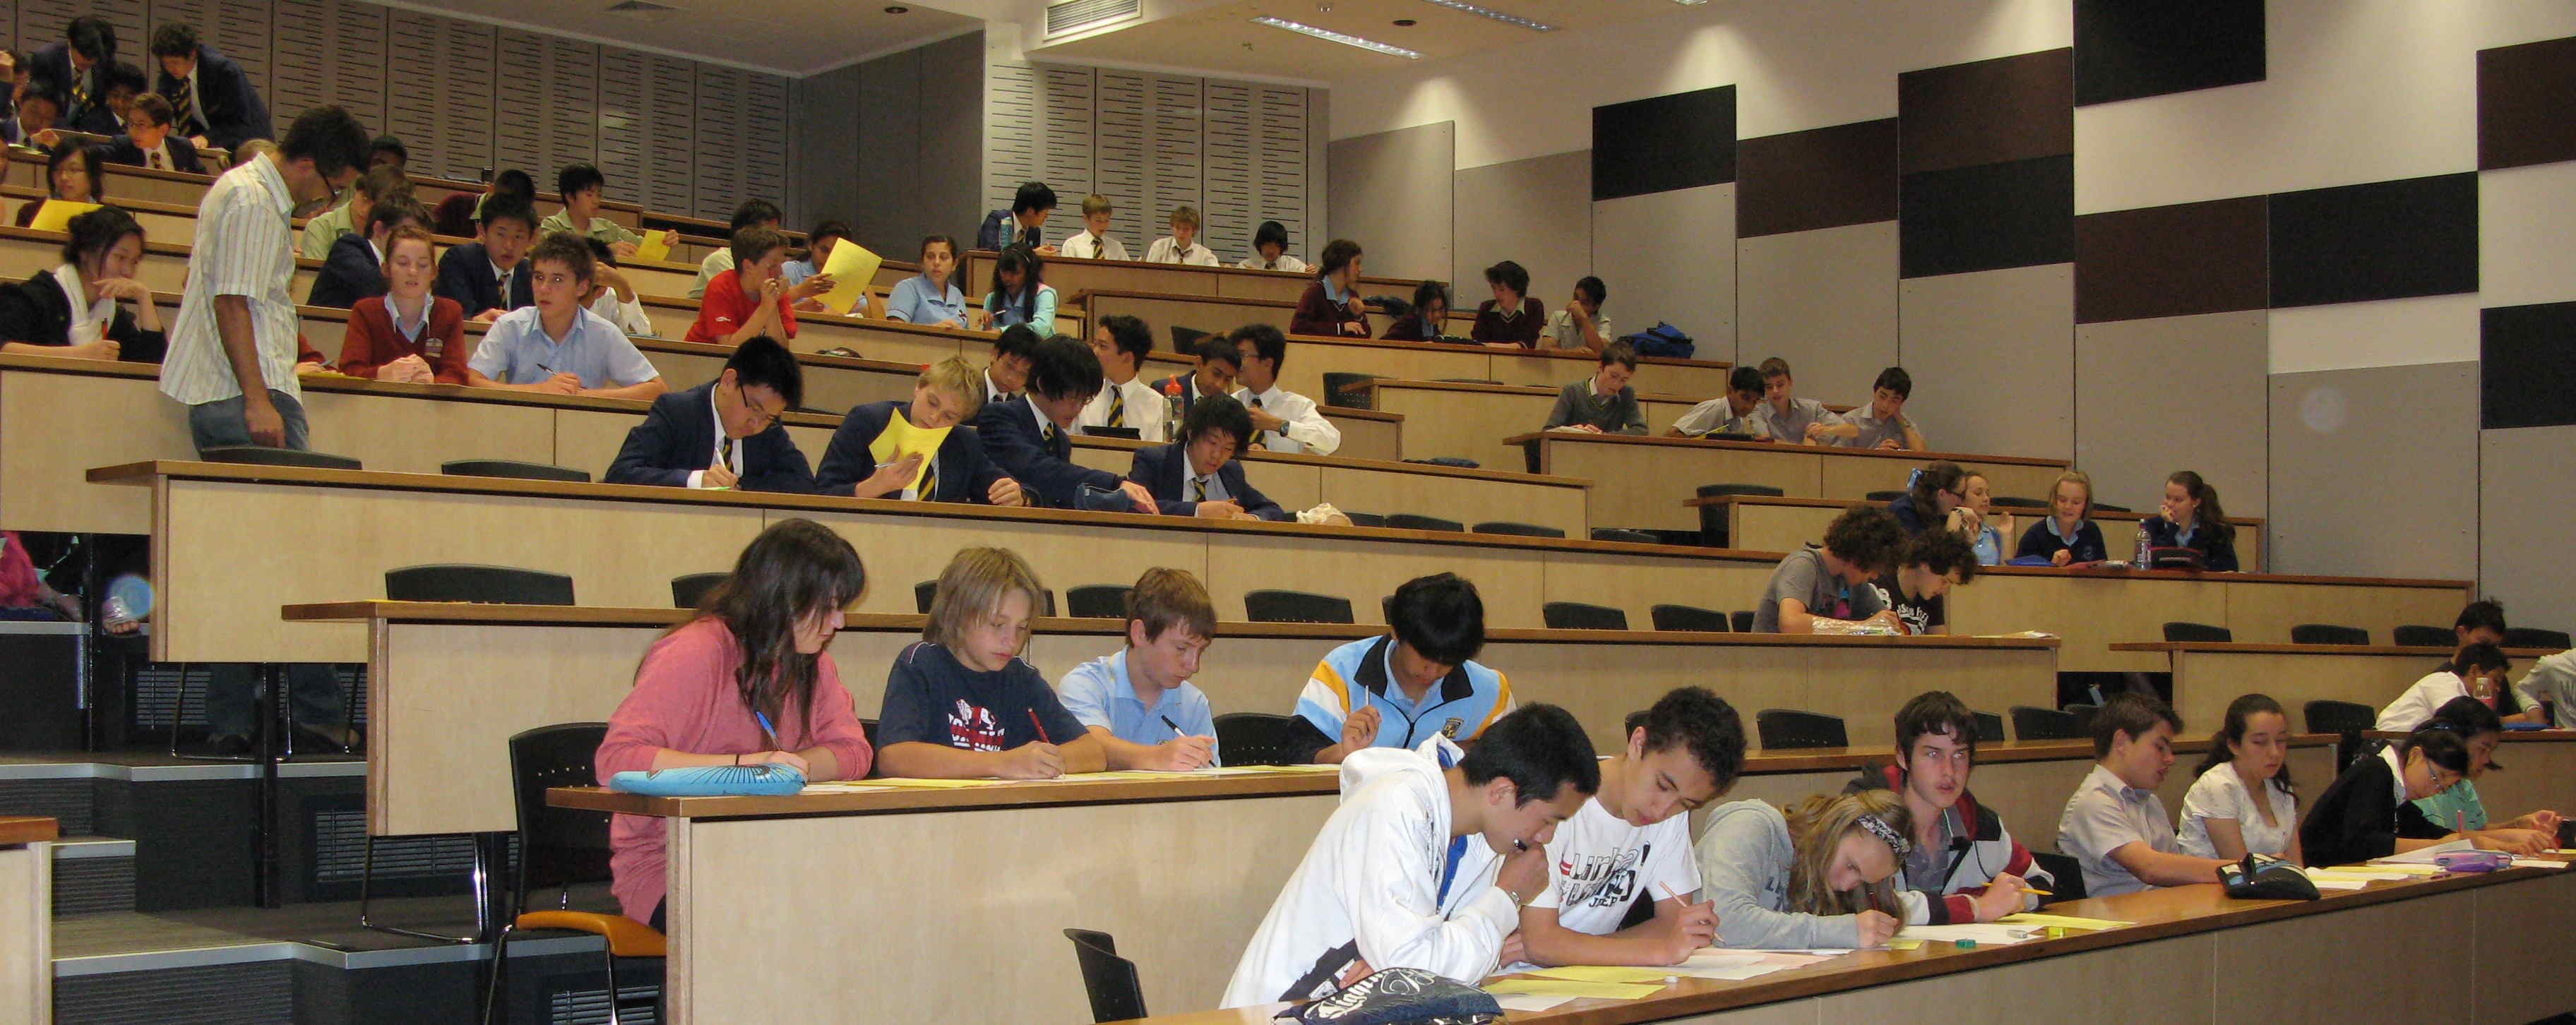 WAJO 2010: Team Competition in Weatherburn Lecture Theatre